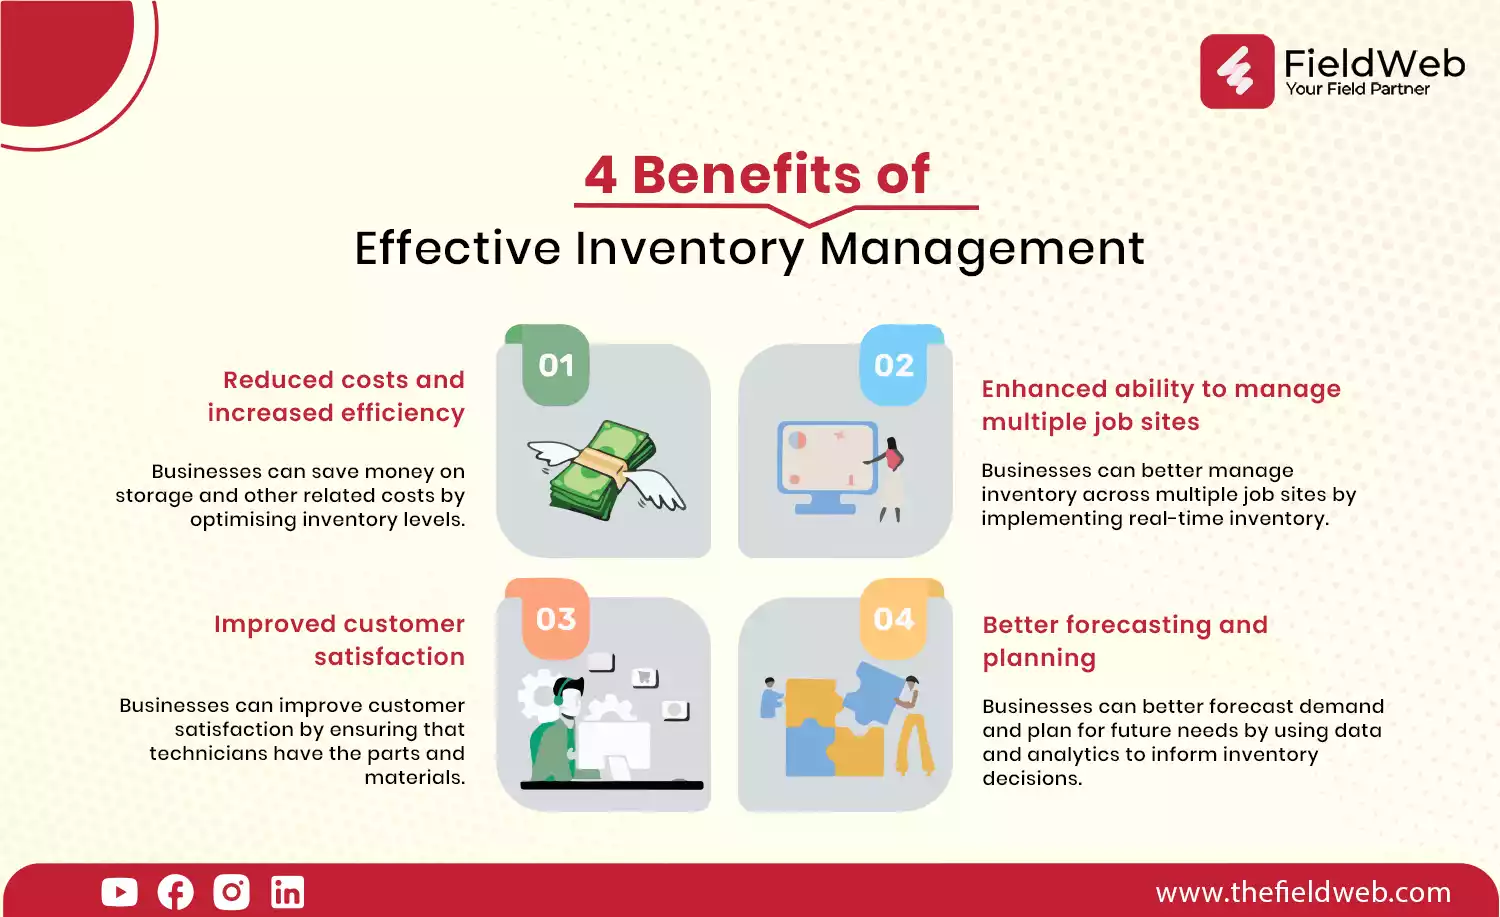 image is displaying 4 benefits of effective inventory management for field service businesses